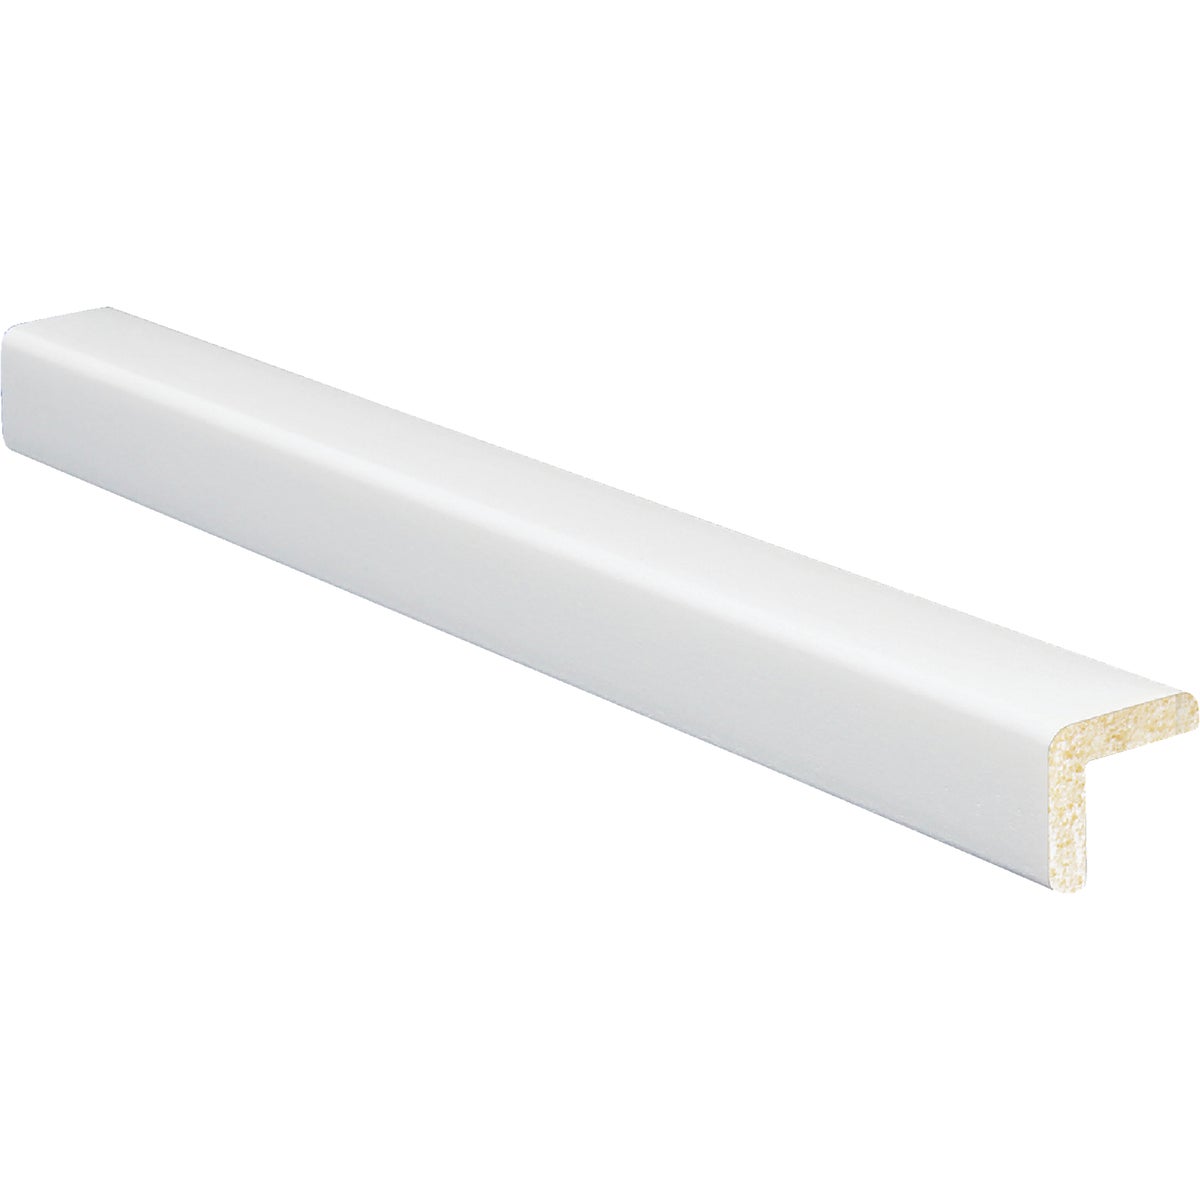 Item 160494, Pre-finished large outside corner molding that is easy to install.